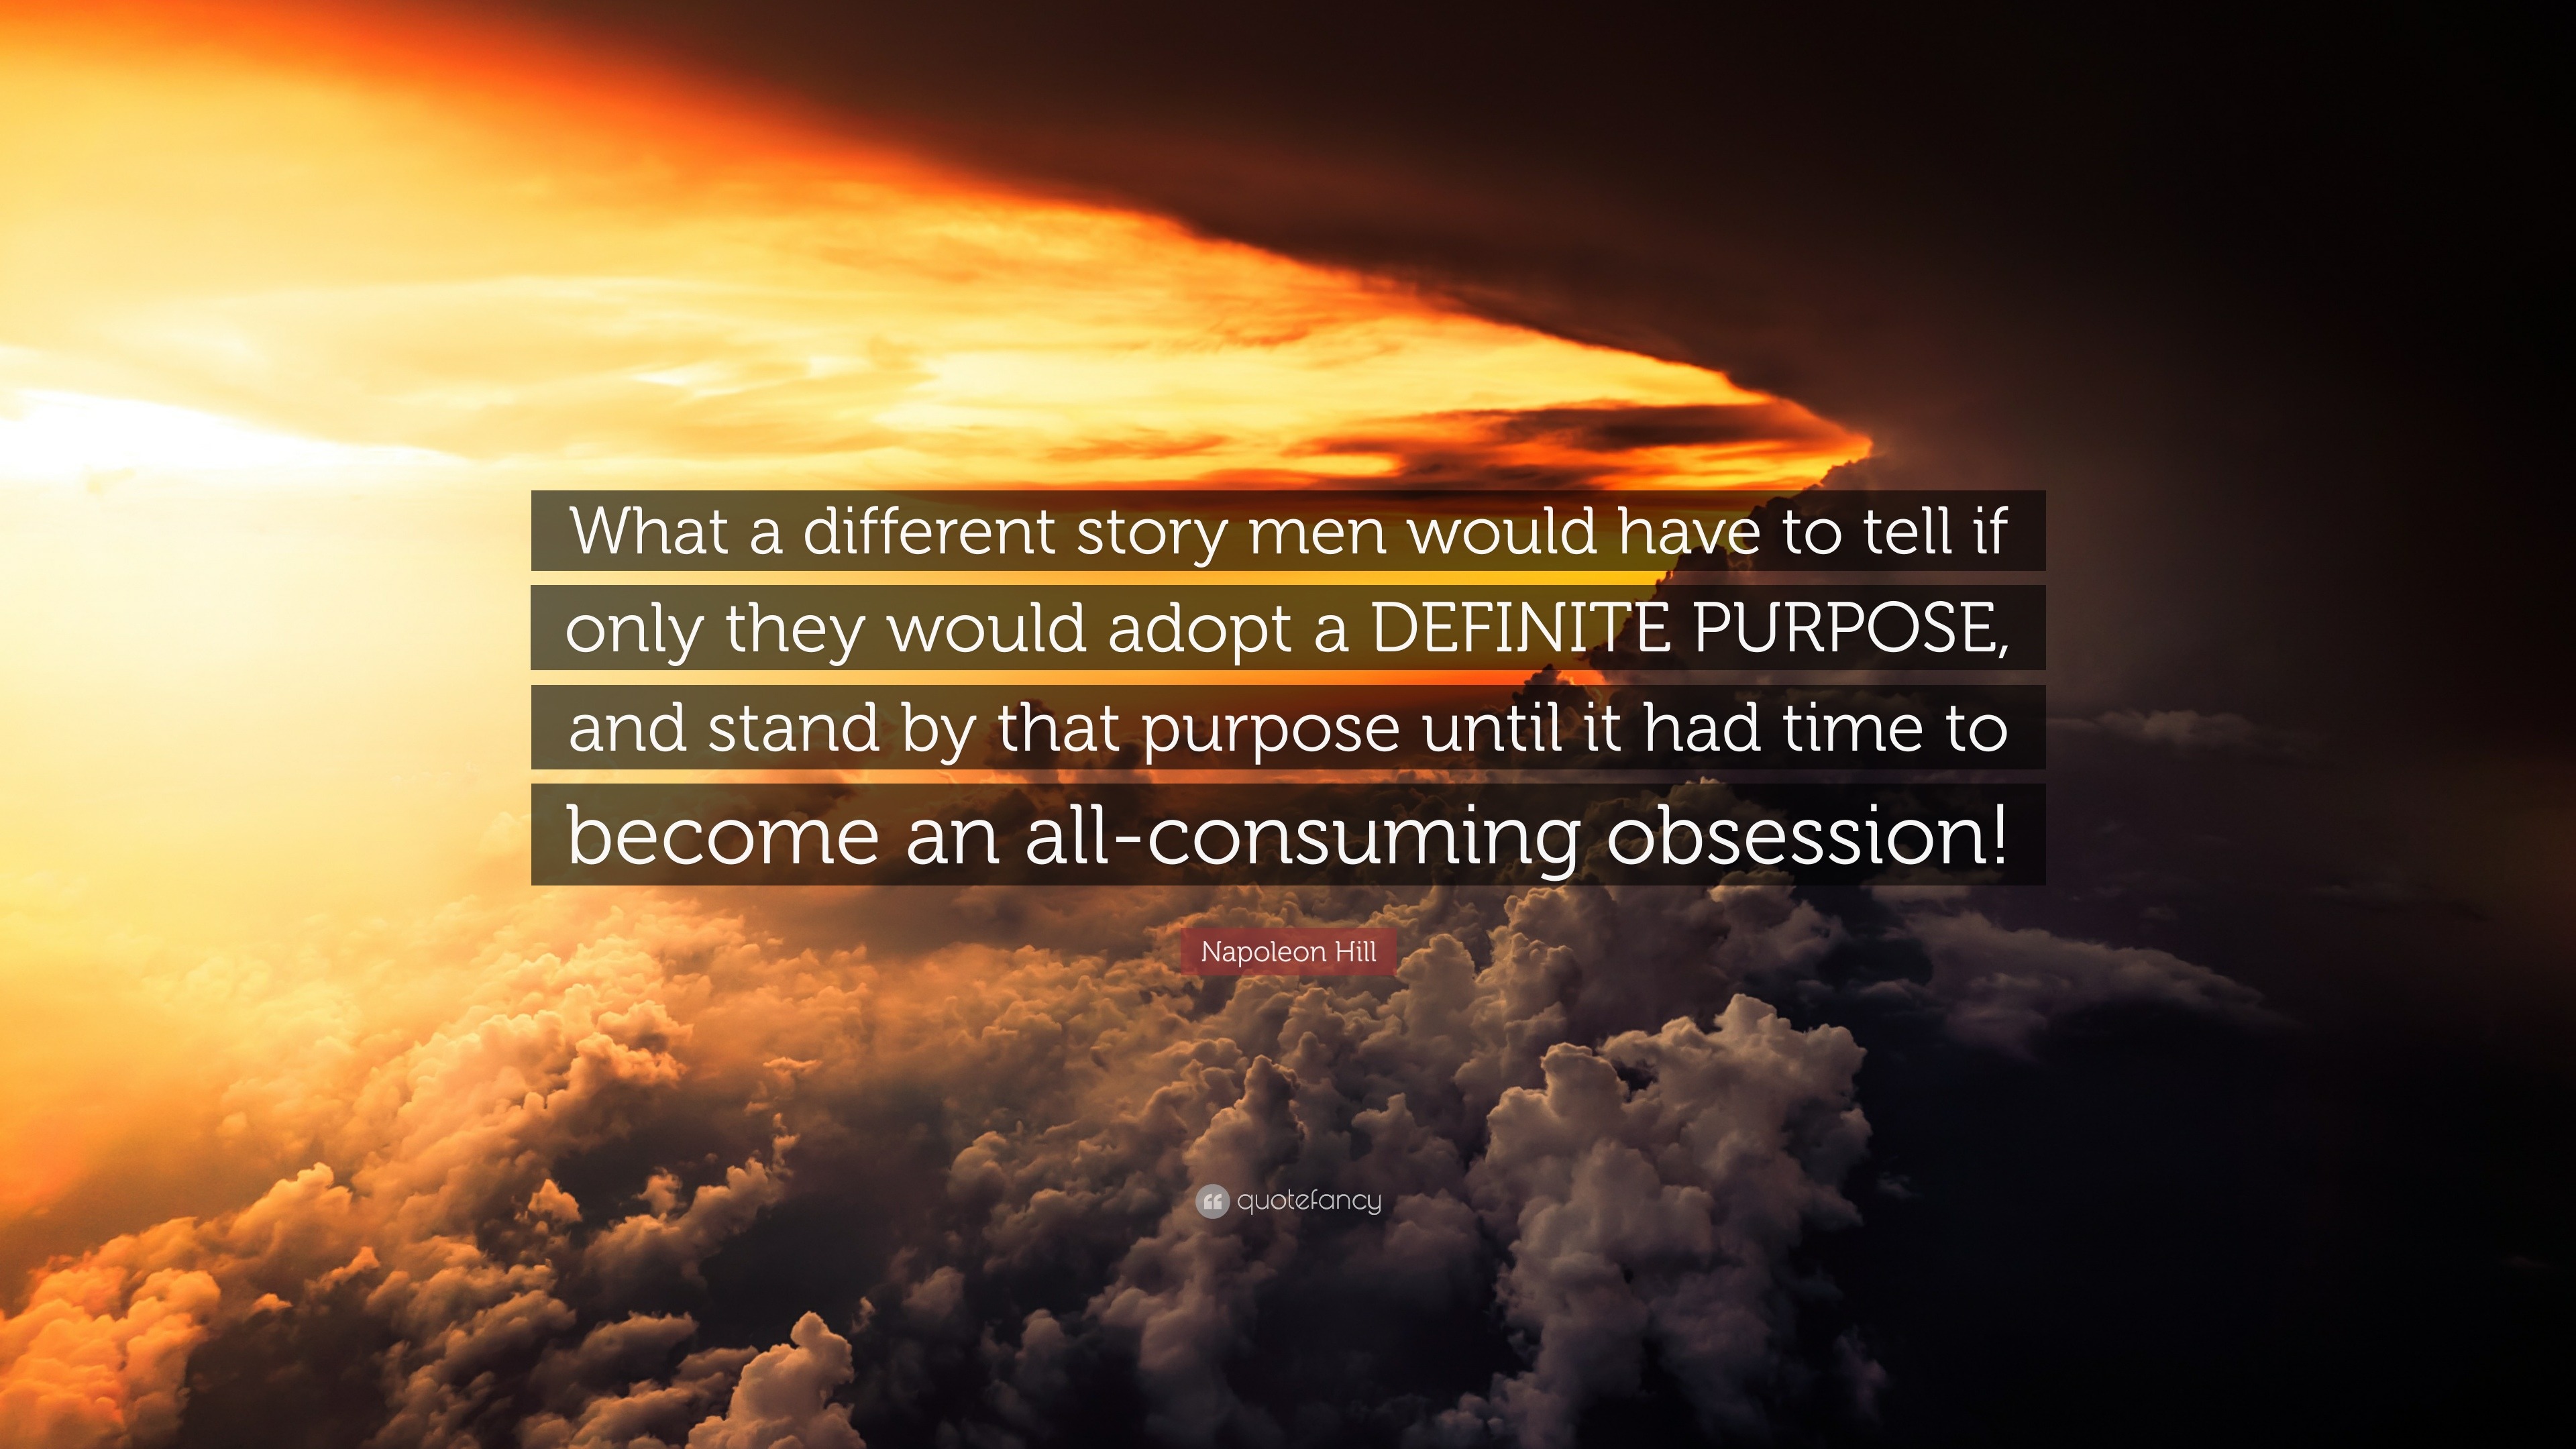 Napoleon Hill Quote What A Different Story Men Would Have To Tell If Only They Would Adopt A Definite Purpose And Stand By That Purpose Unt